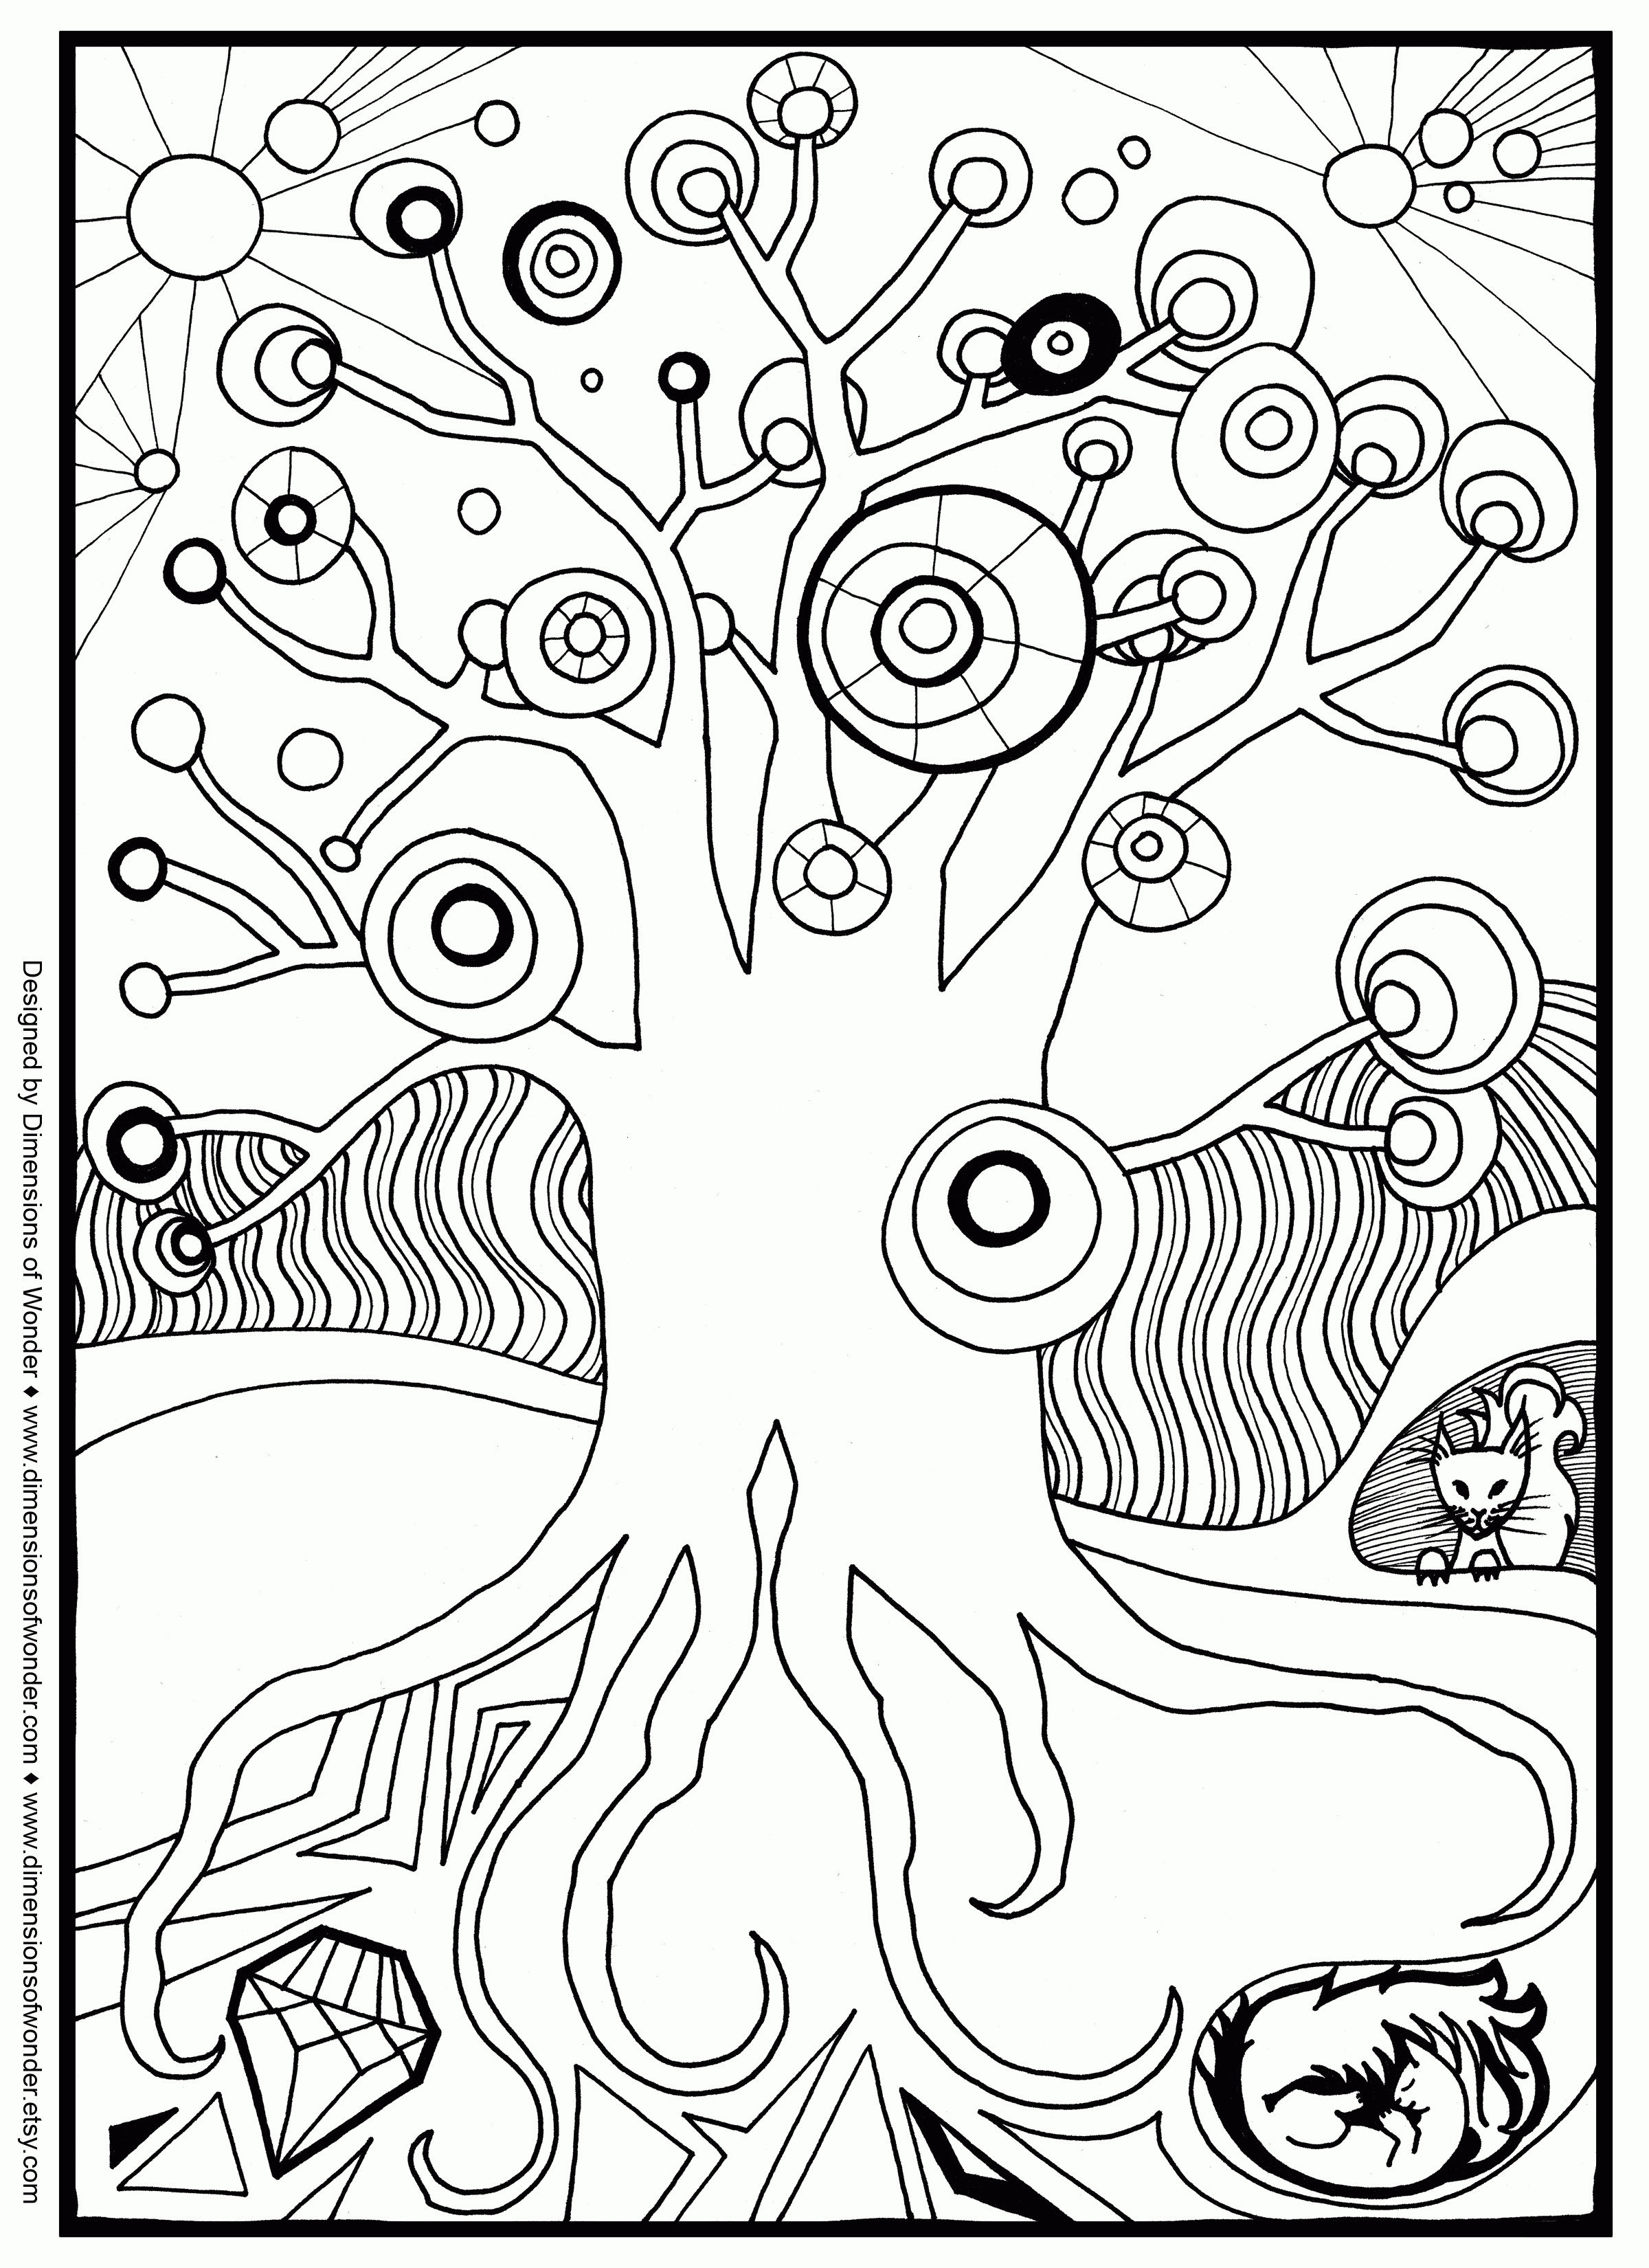 Middle School Coloring Pages
 Coloring Worksheets For Middle School Coloring Best Free